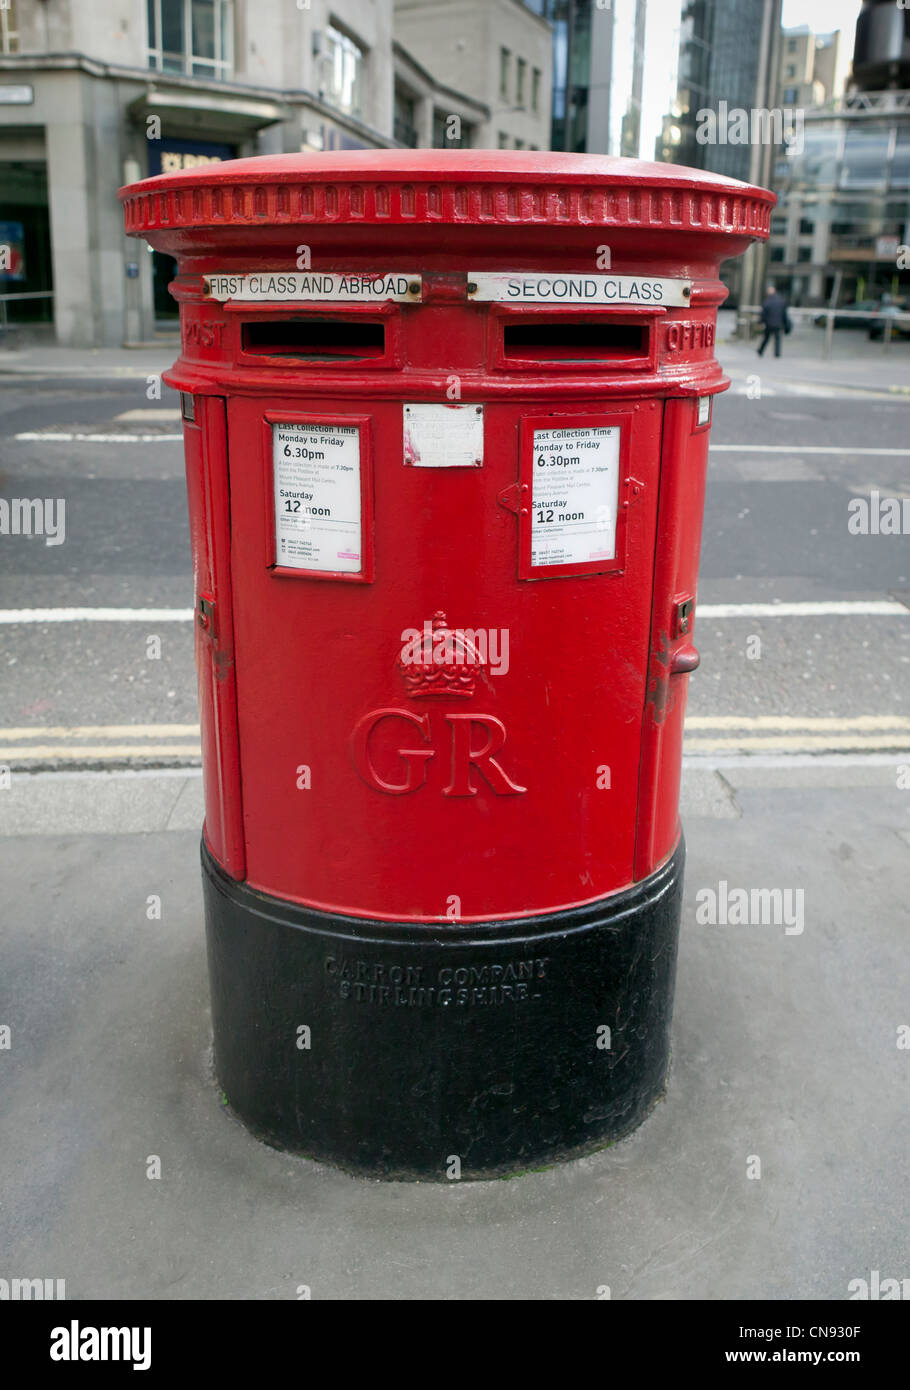 Red Royal Mailbox on street of London Stock Photo